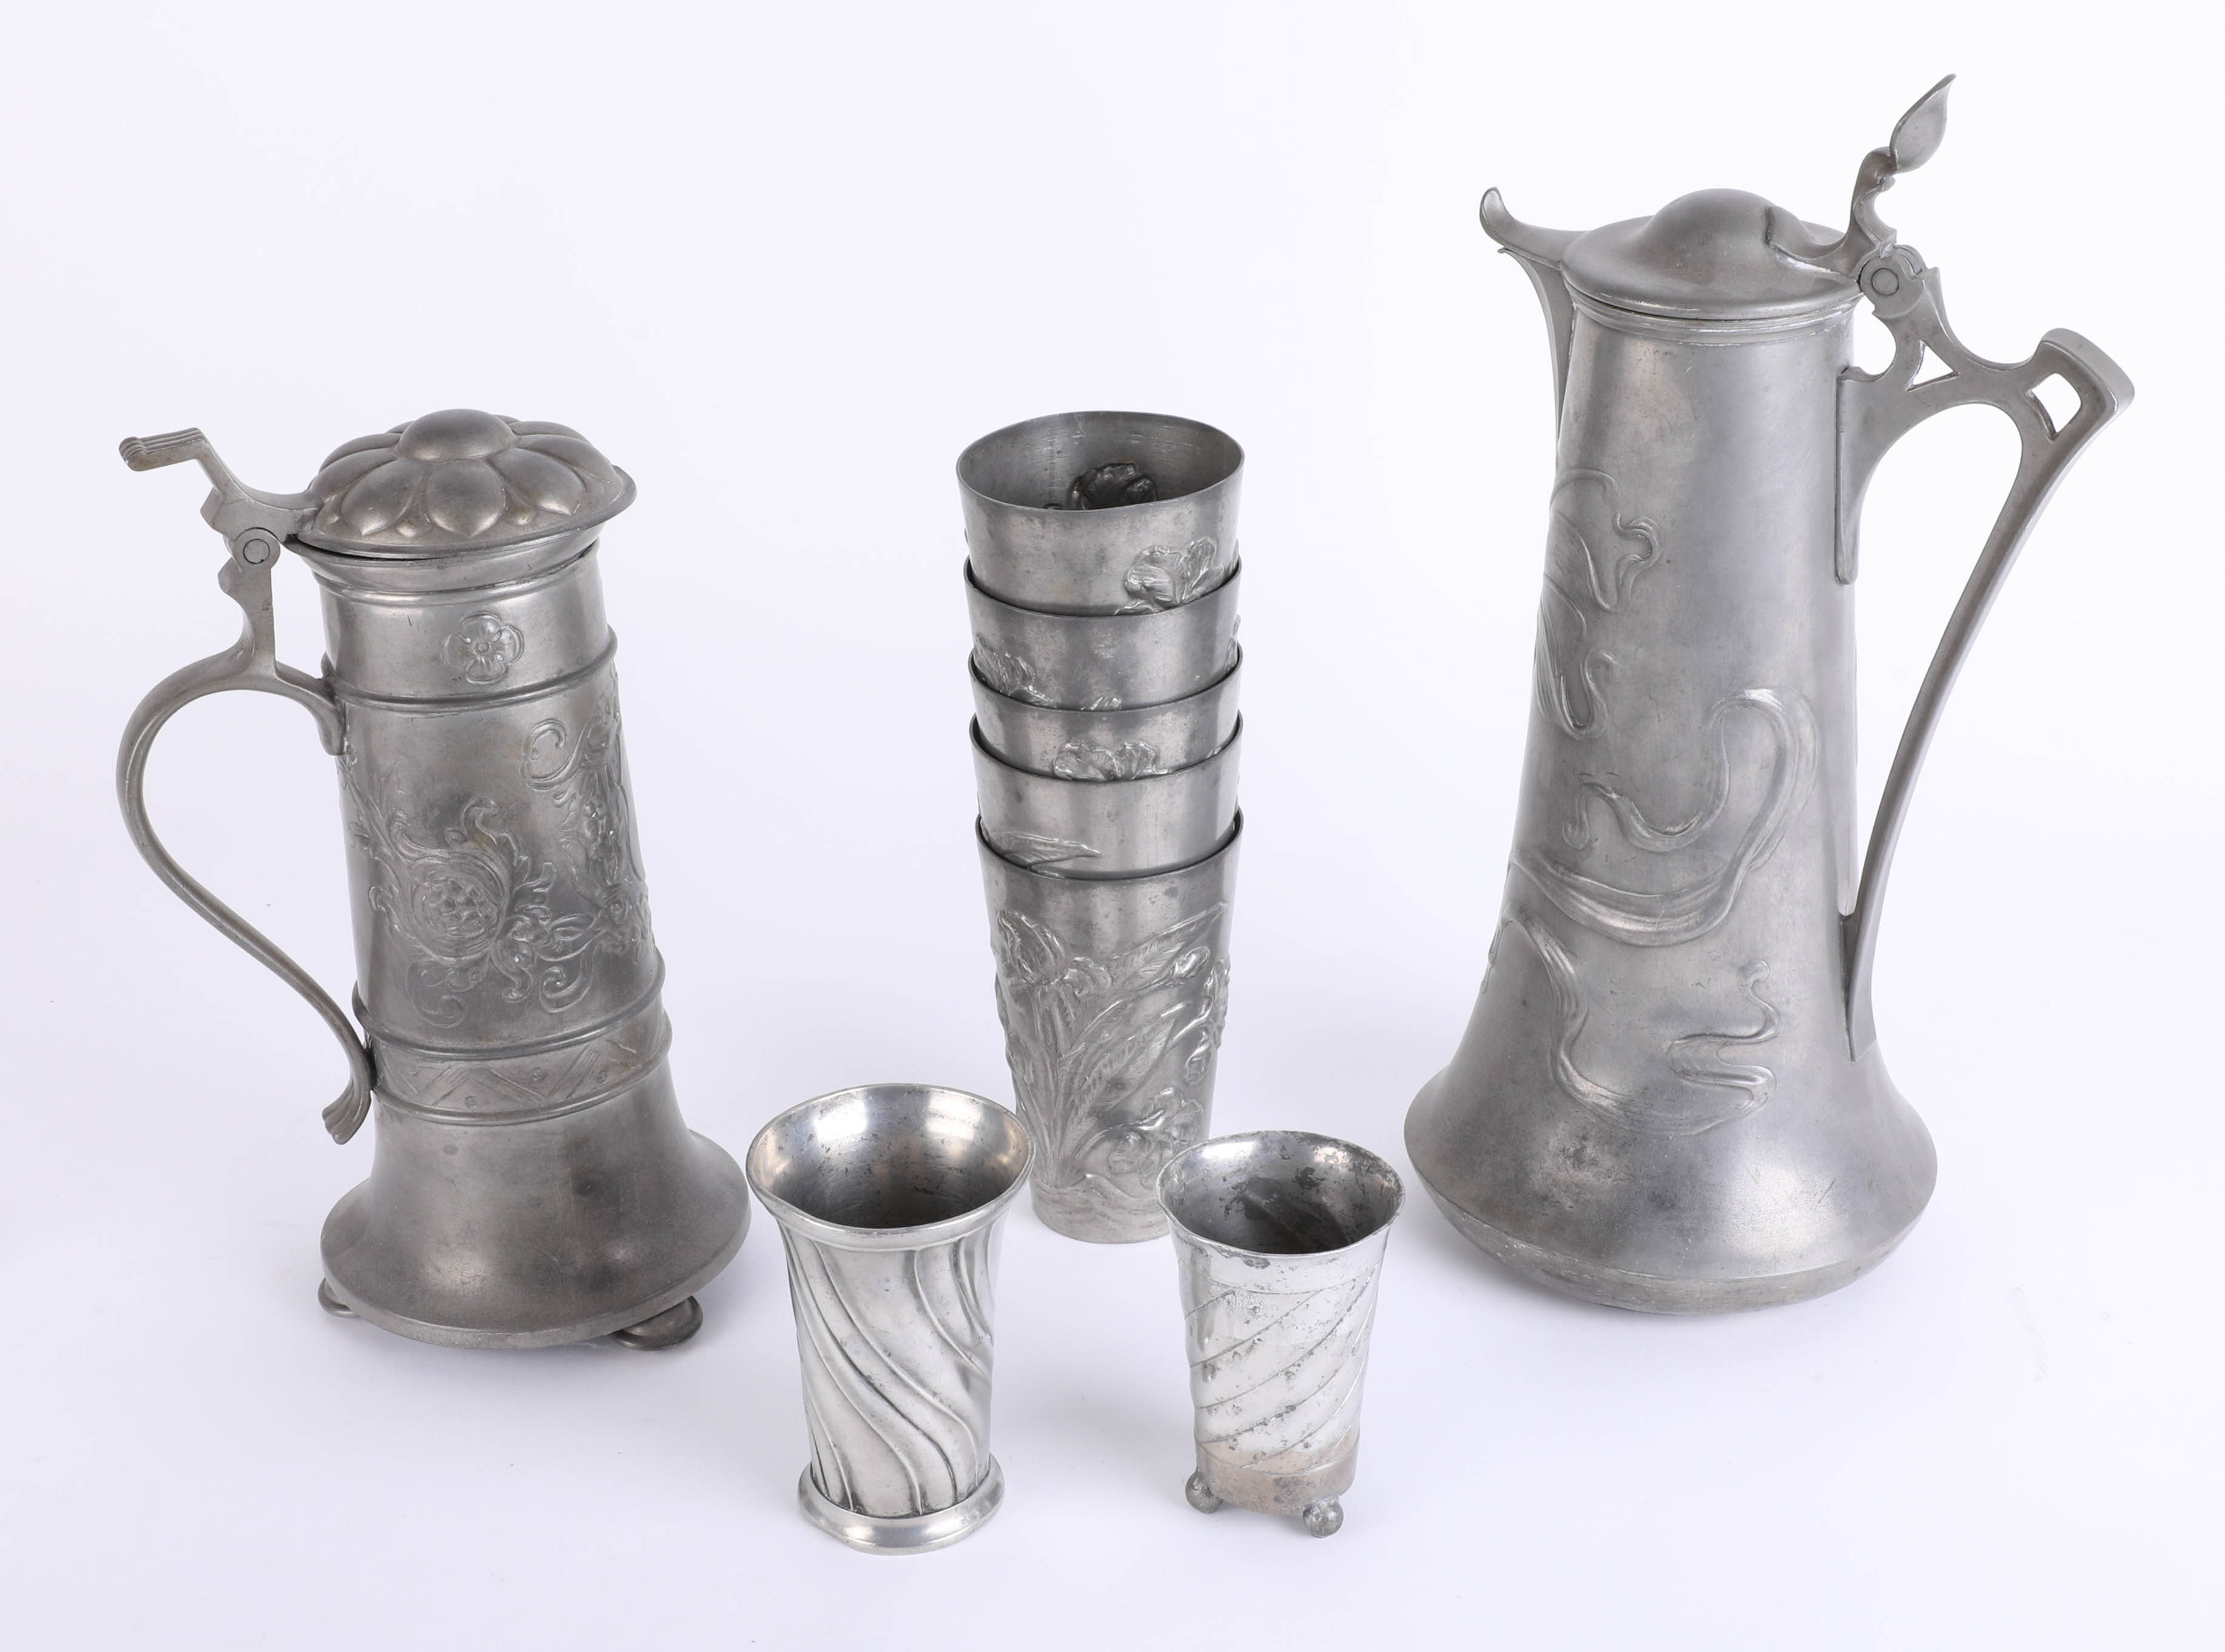 Art Nouveau style Bavarian pewter, including flagons and beakers (9).